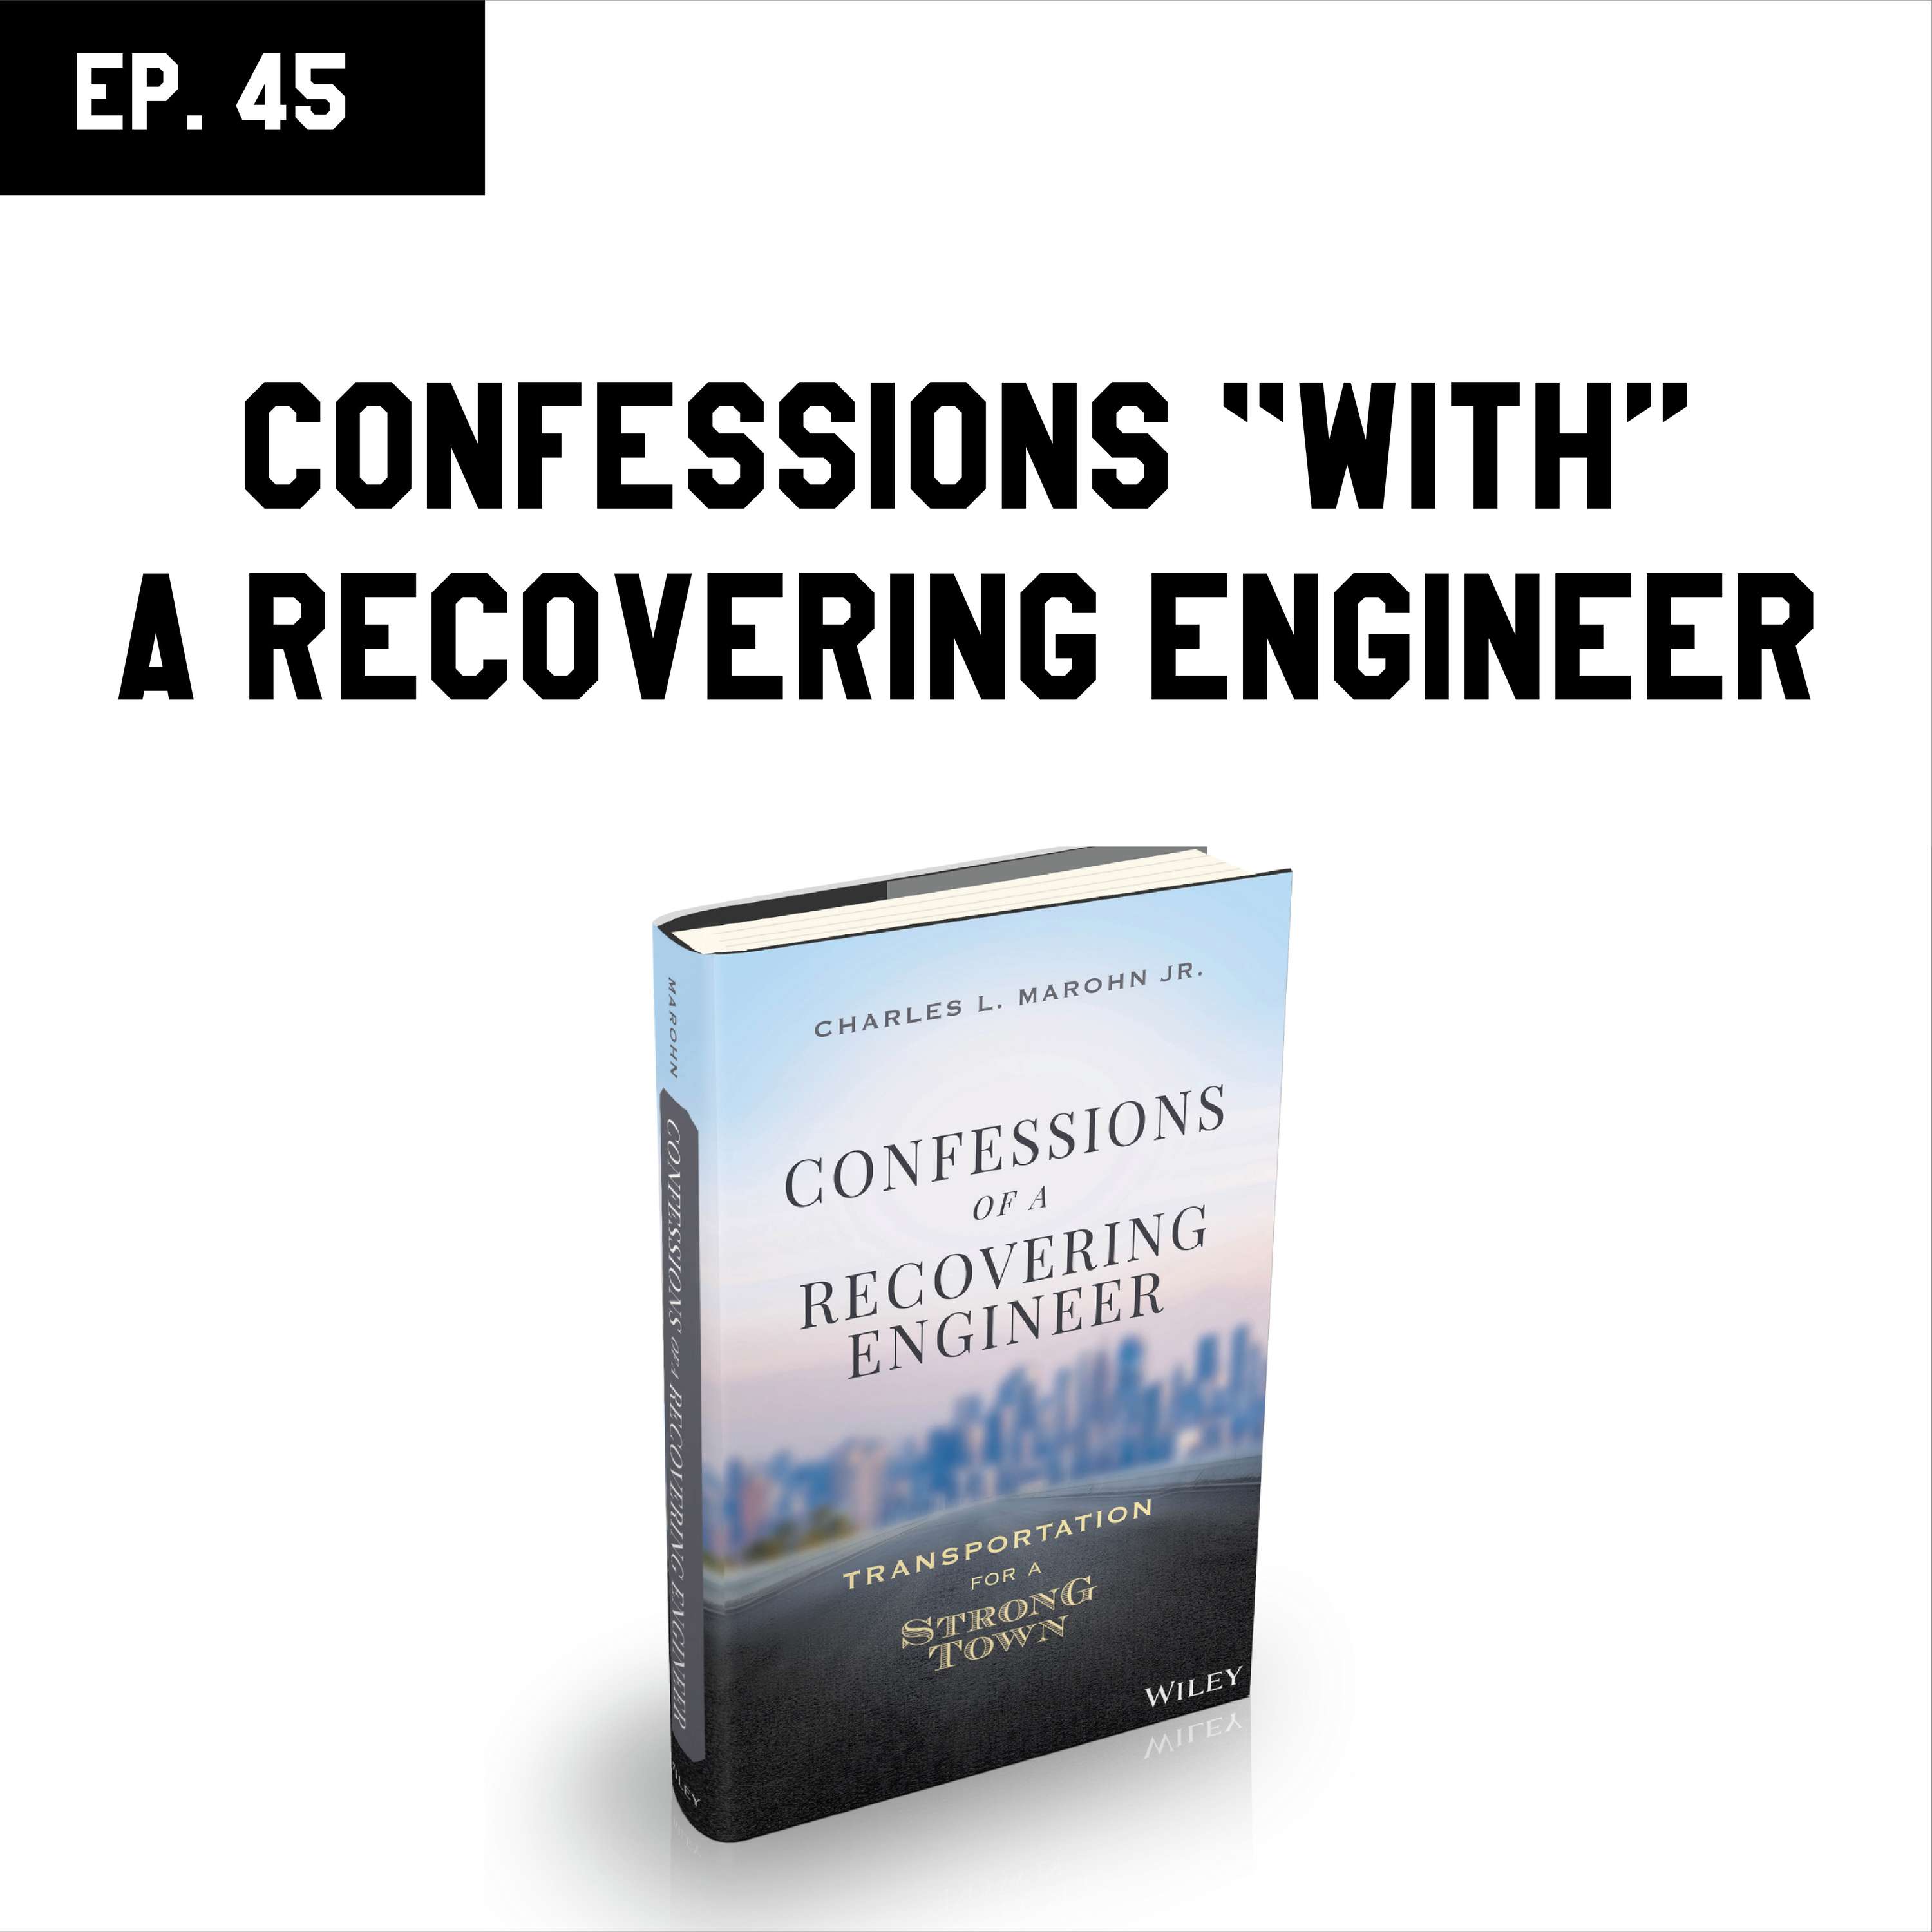 EP 45 - Confessions "with" a Recovering Engineer